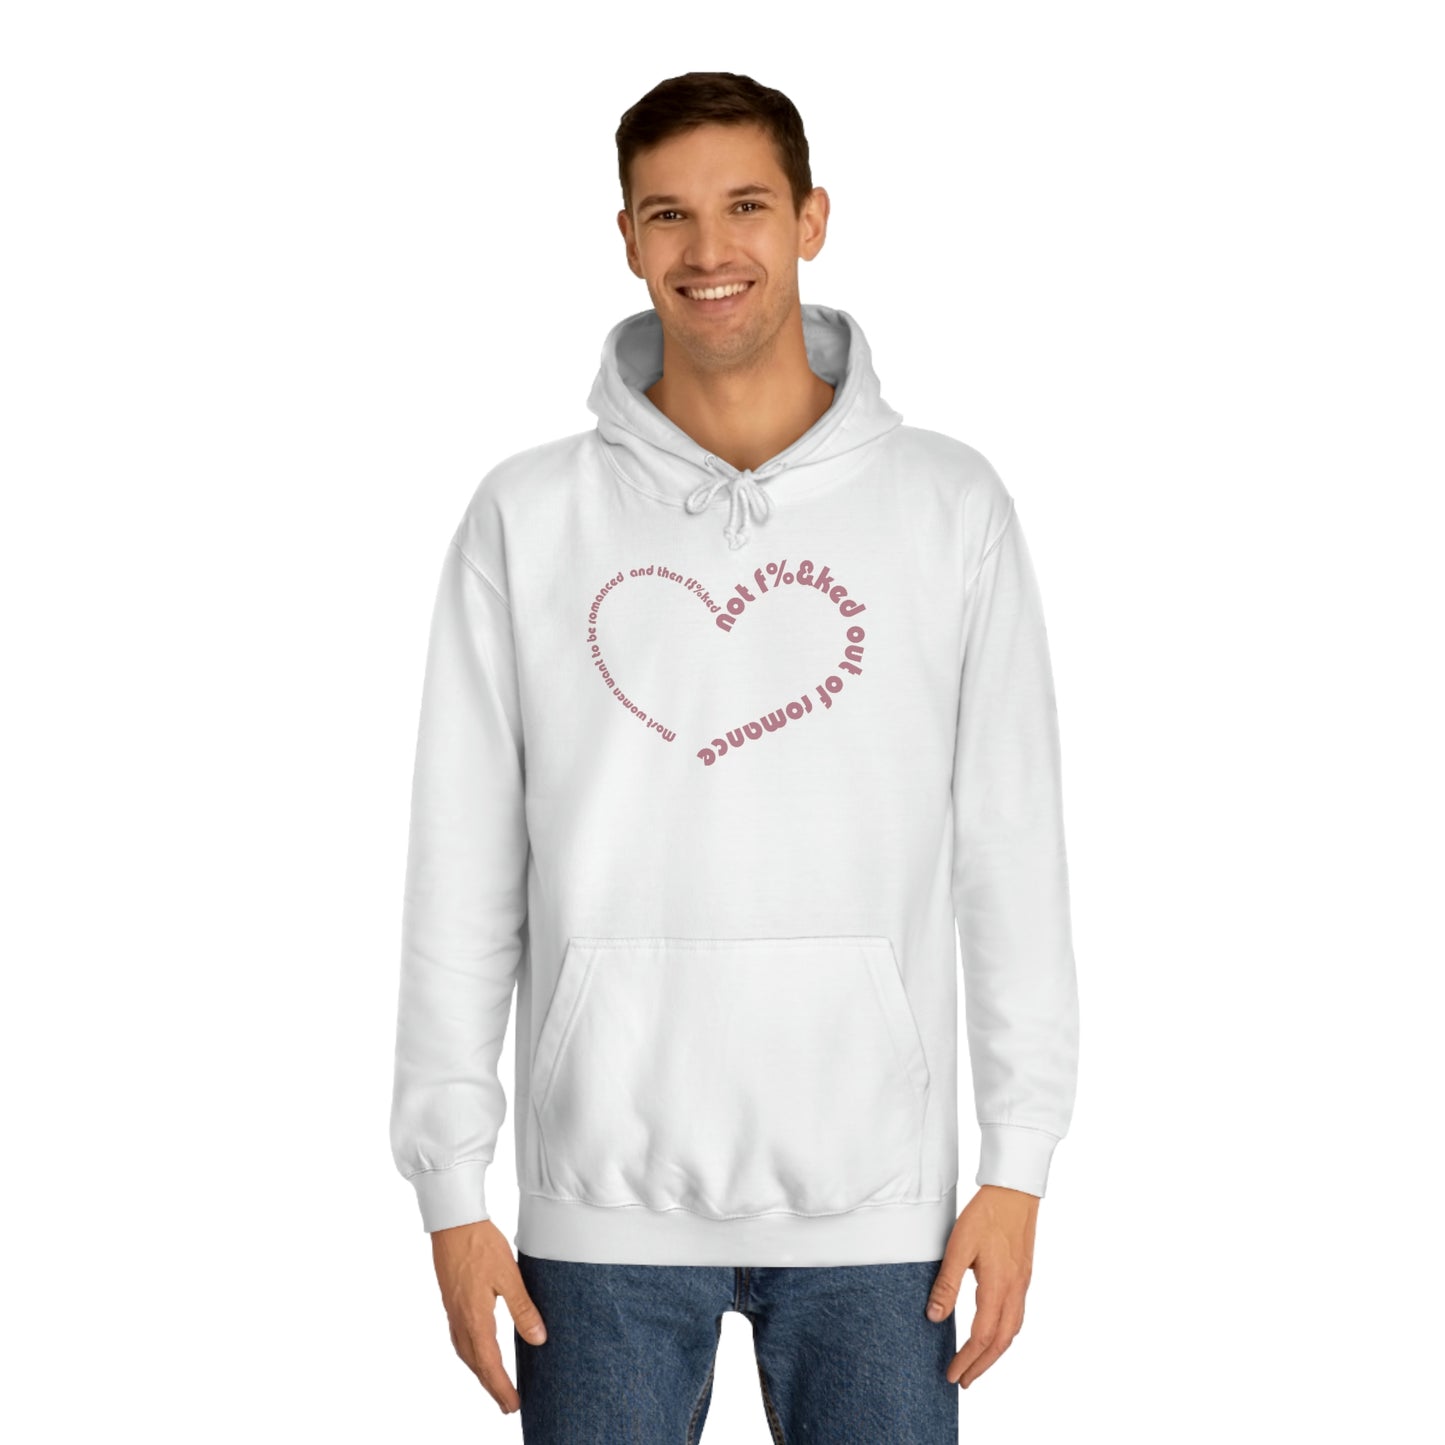 “…Out of Romance” Unisex College Hoodie